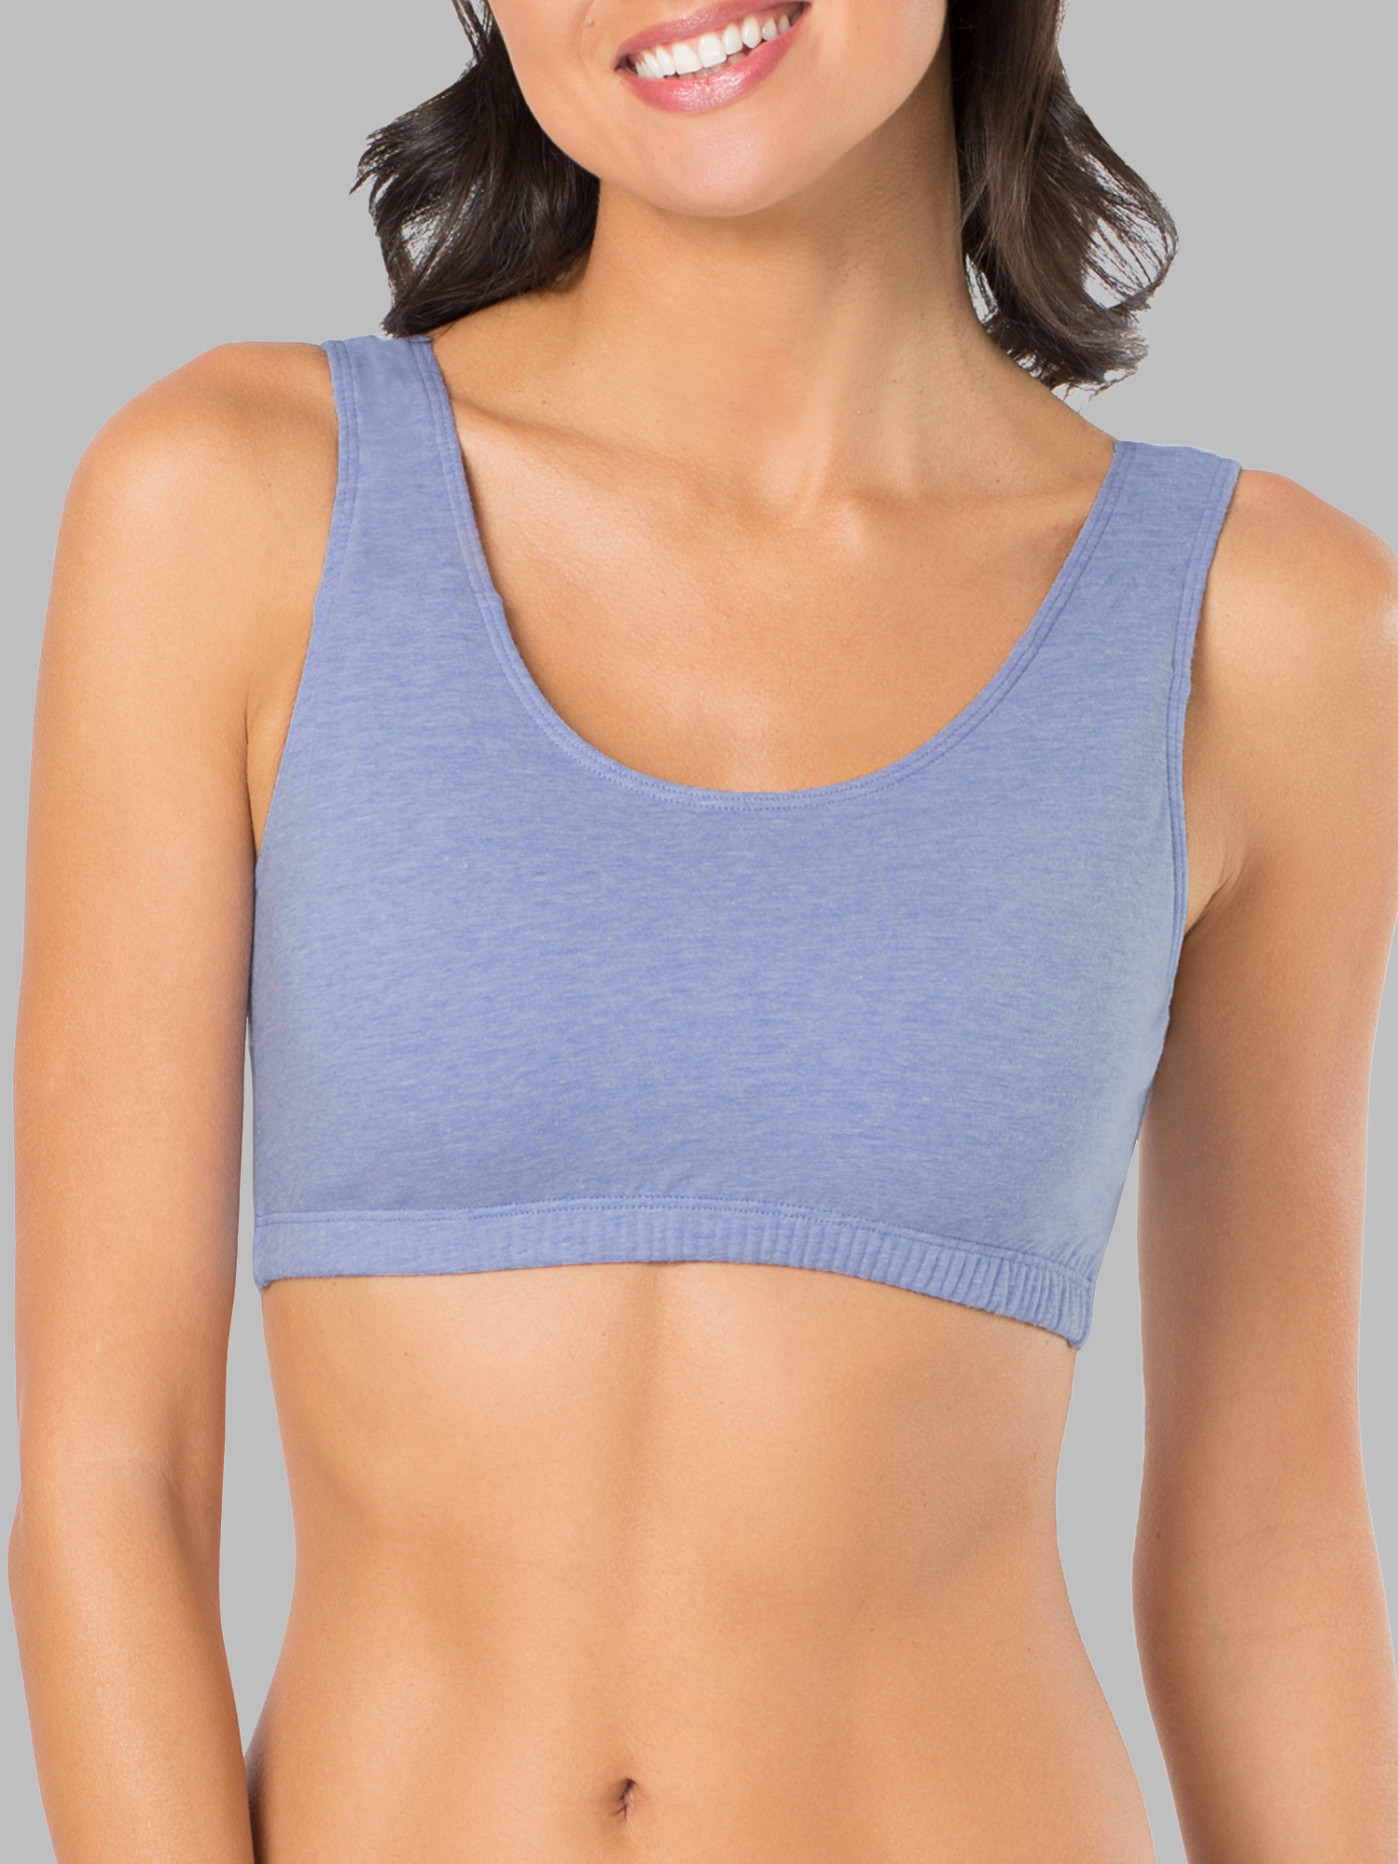 Two Tone Sports Bra  Racer Back and On Sale! – PUBLIC MYTH